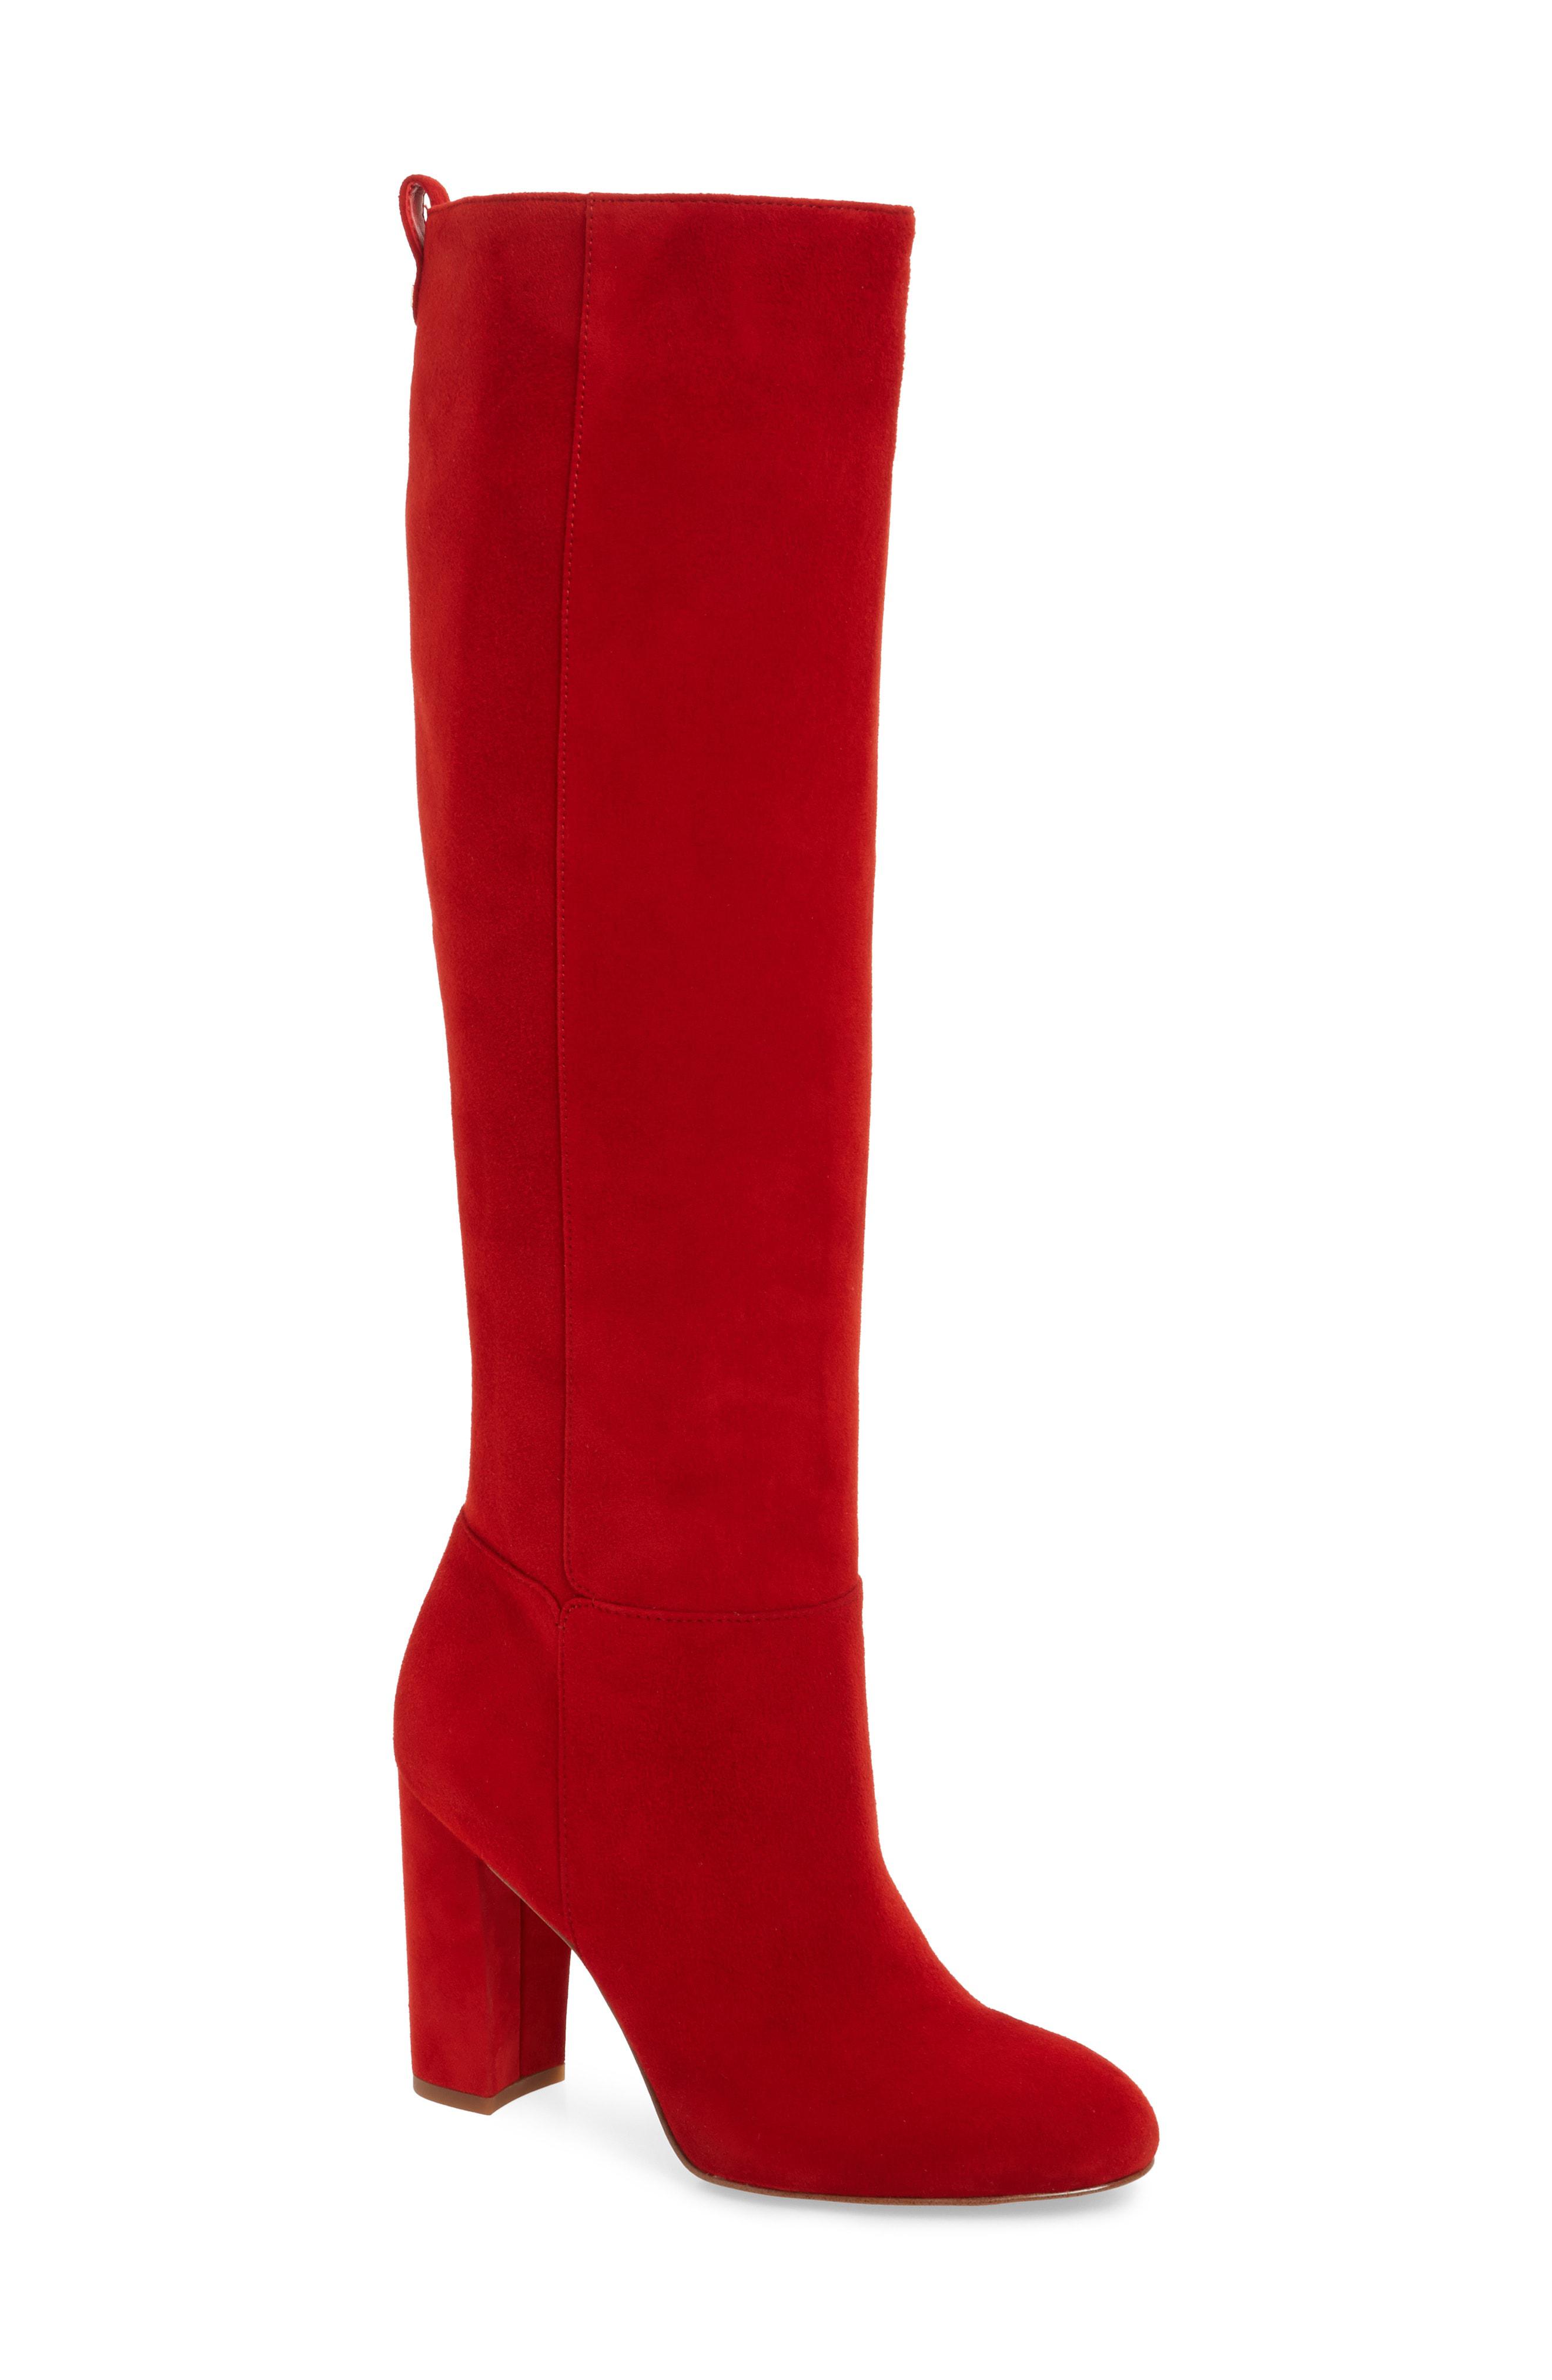 red suede knee high boots